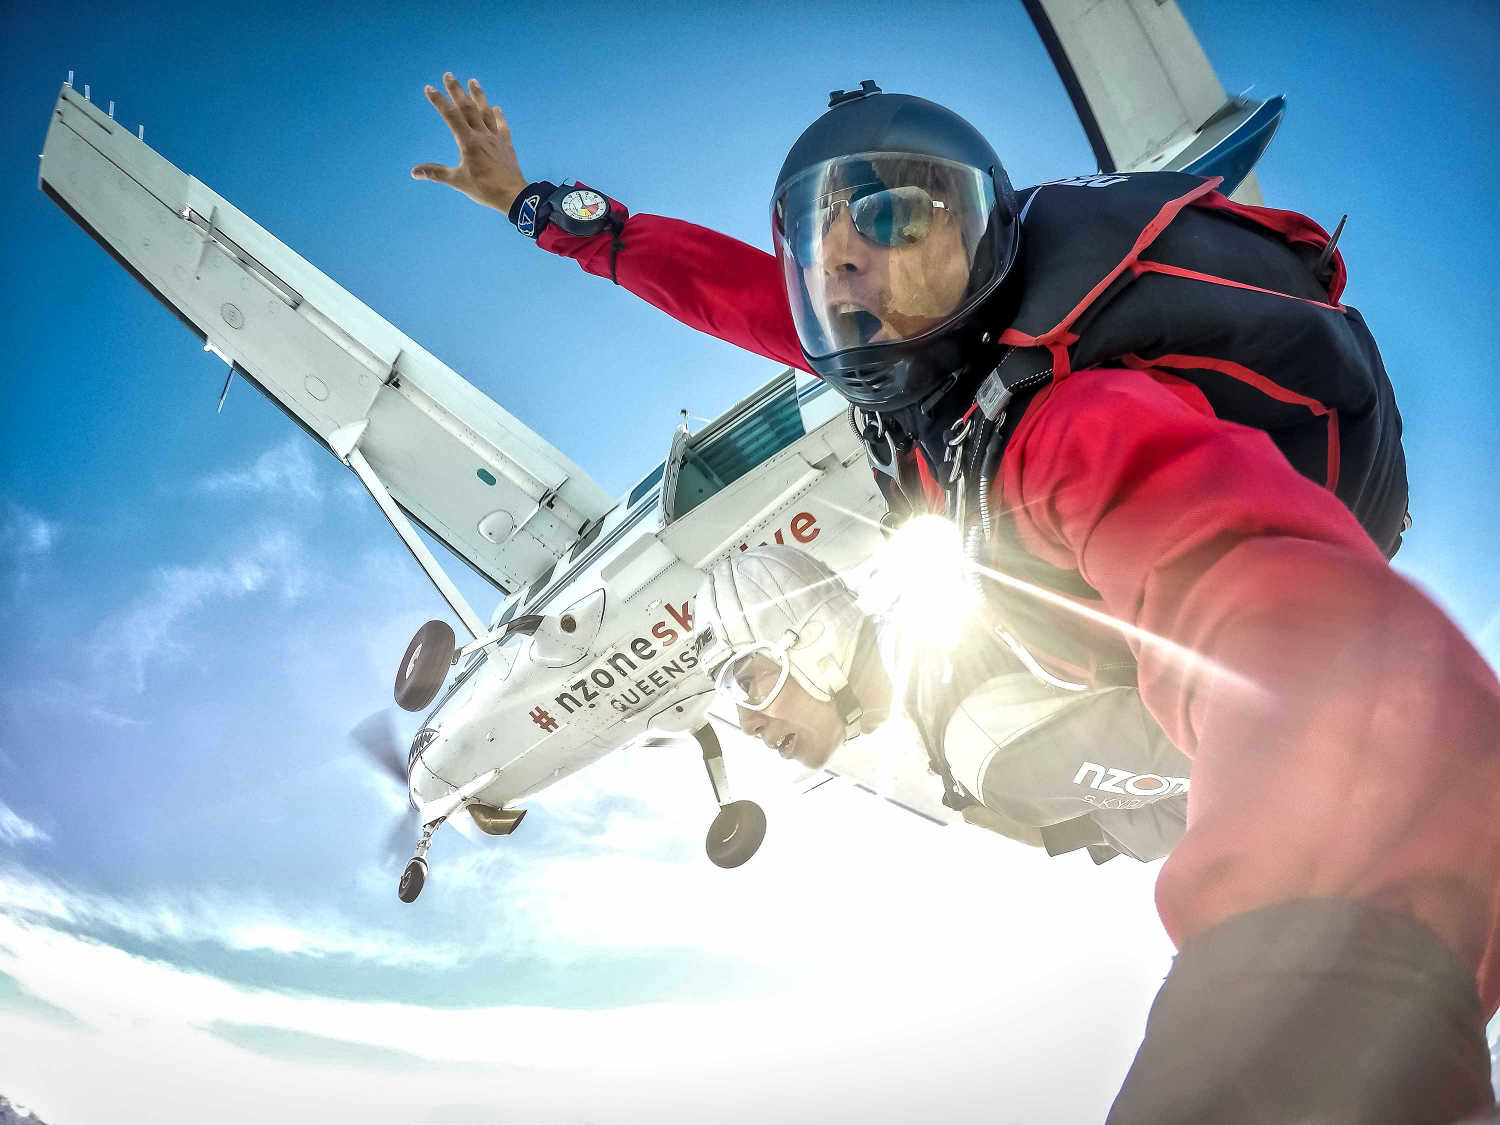 Skydiving adventure over Queenstown, South Island, New Zealand